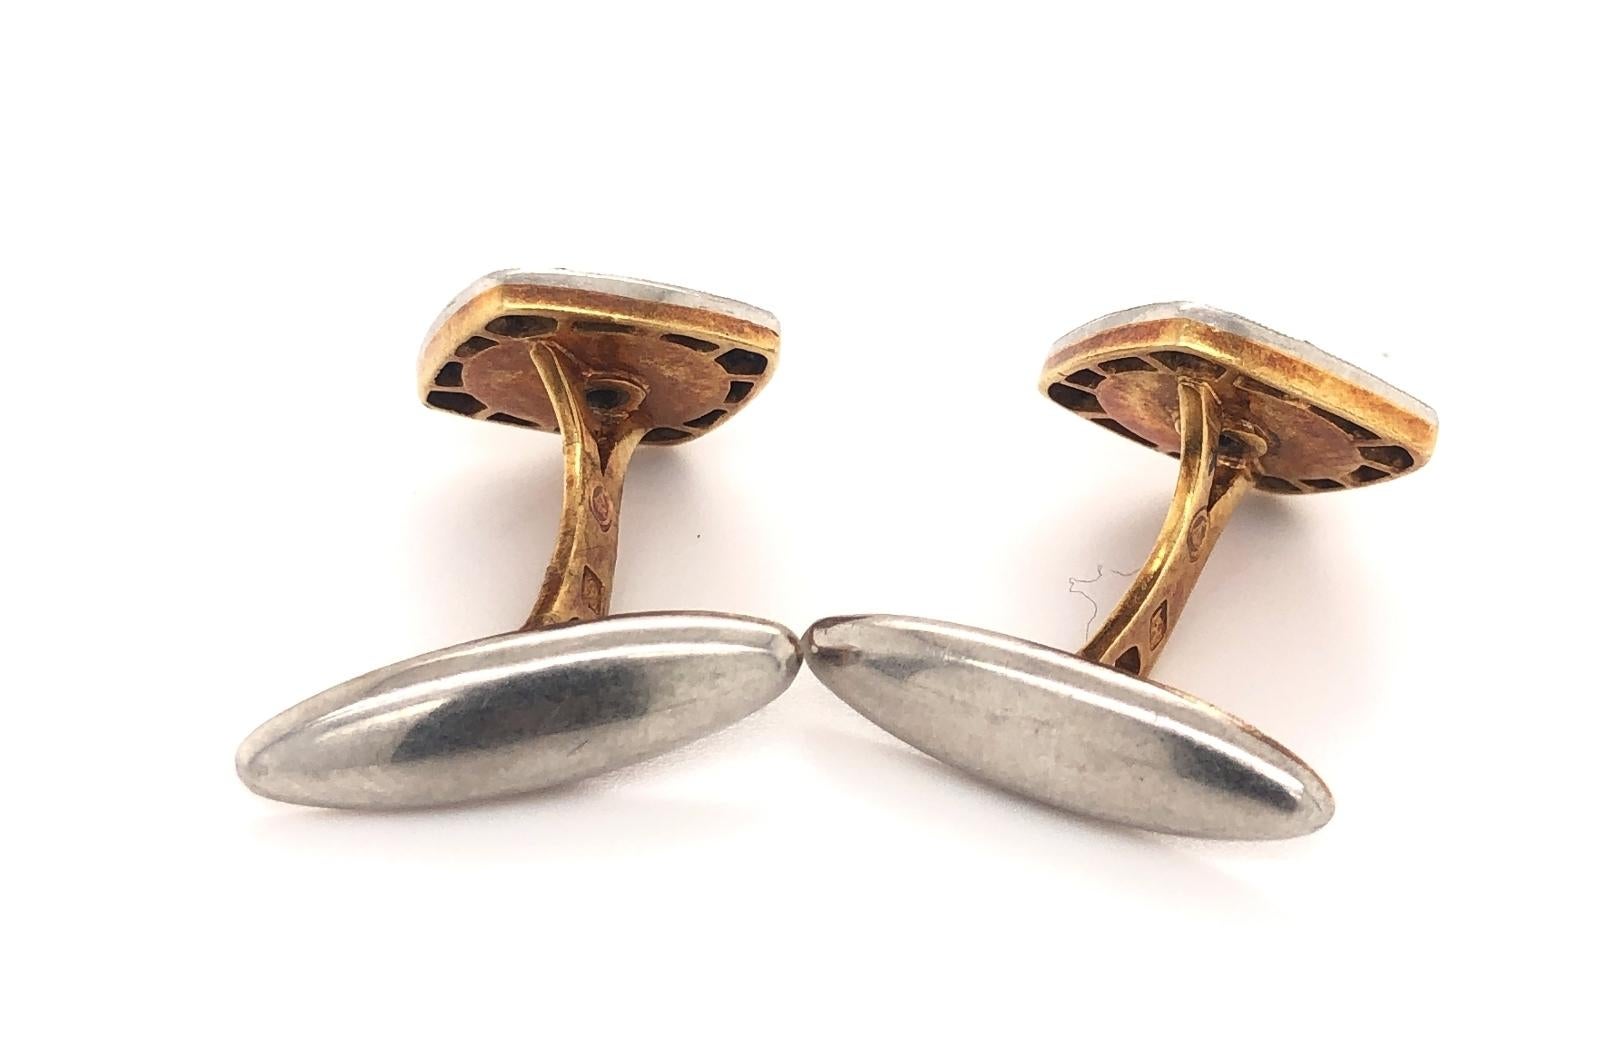 This is a beautiful pair of original art deco c.1930 platinum and 18k gold cufflinks with natural sapphires and diamonds. The cufflinks are marked 18K with makers marks. The 40 custom cut sapphires are natural blue gem quality. The two old mine cut